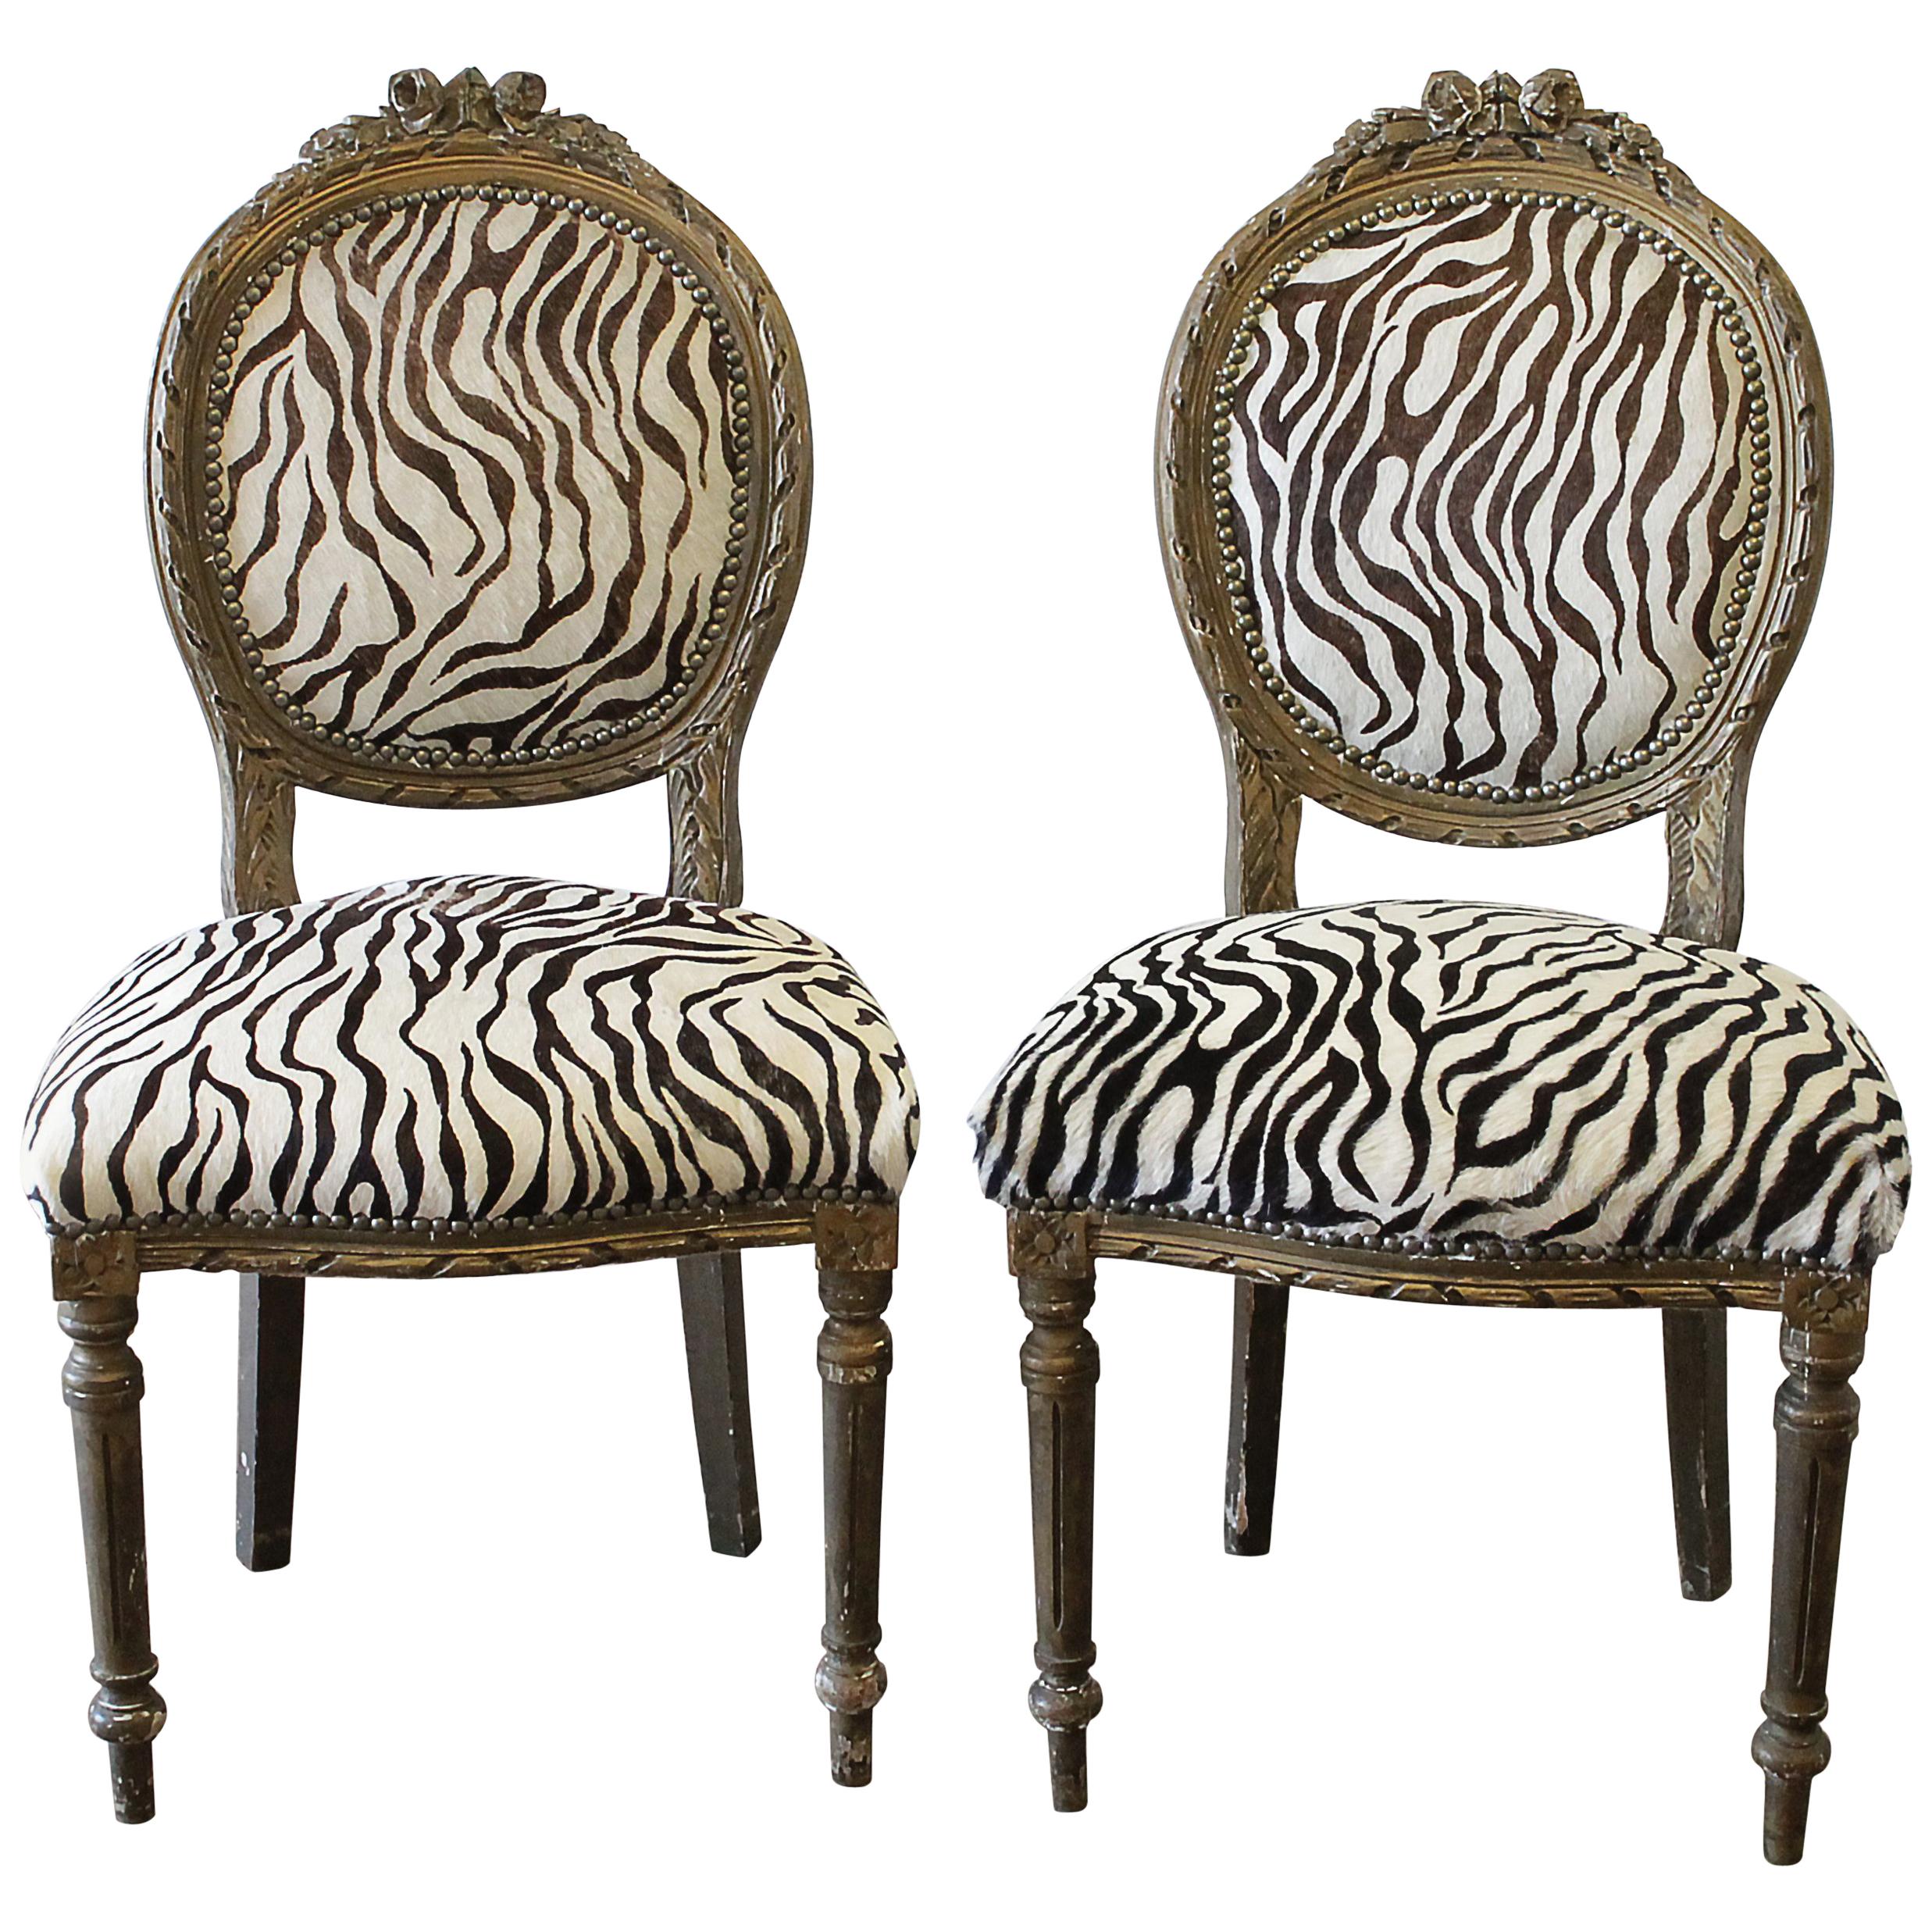 20th Century Carved Giltwood Zebra Upholstered Louis XVI Style Chairs